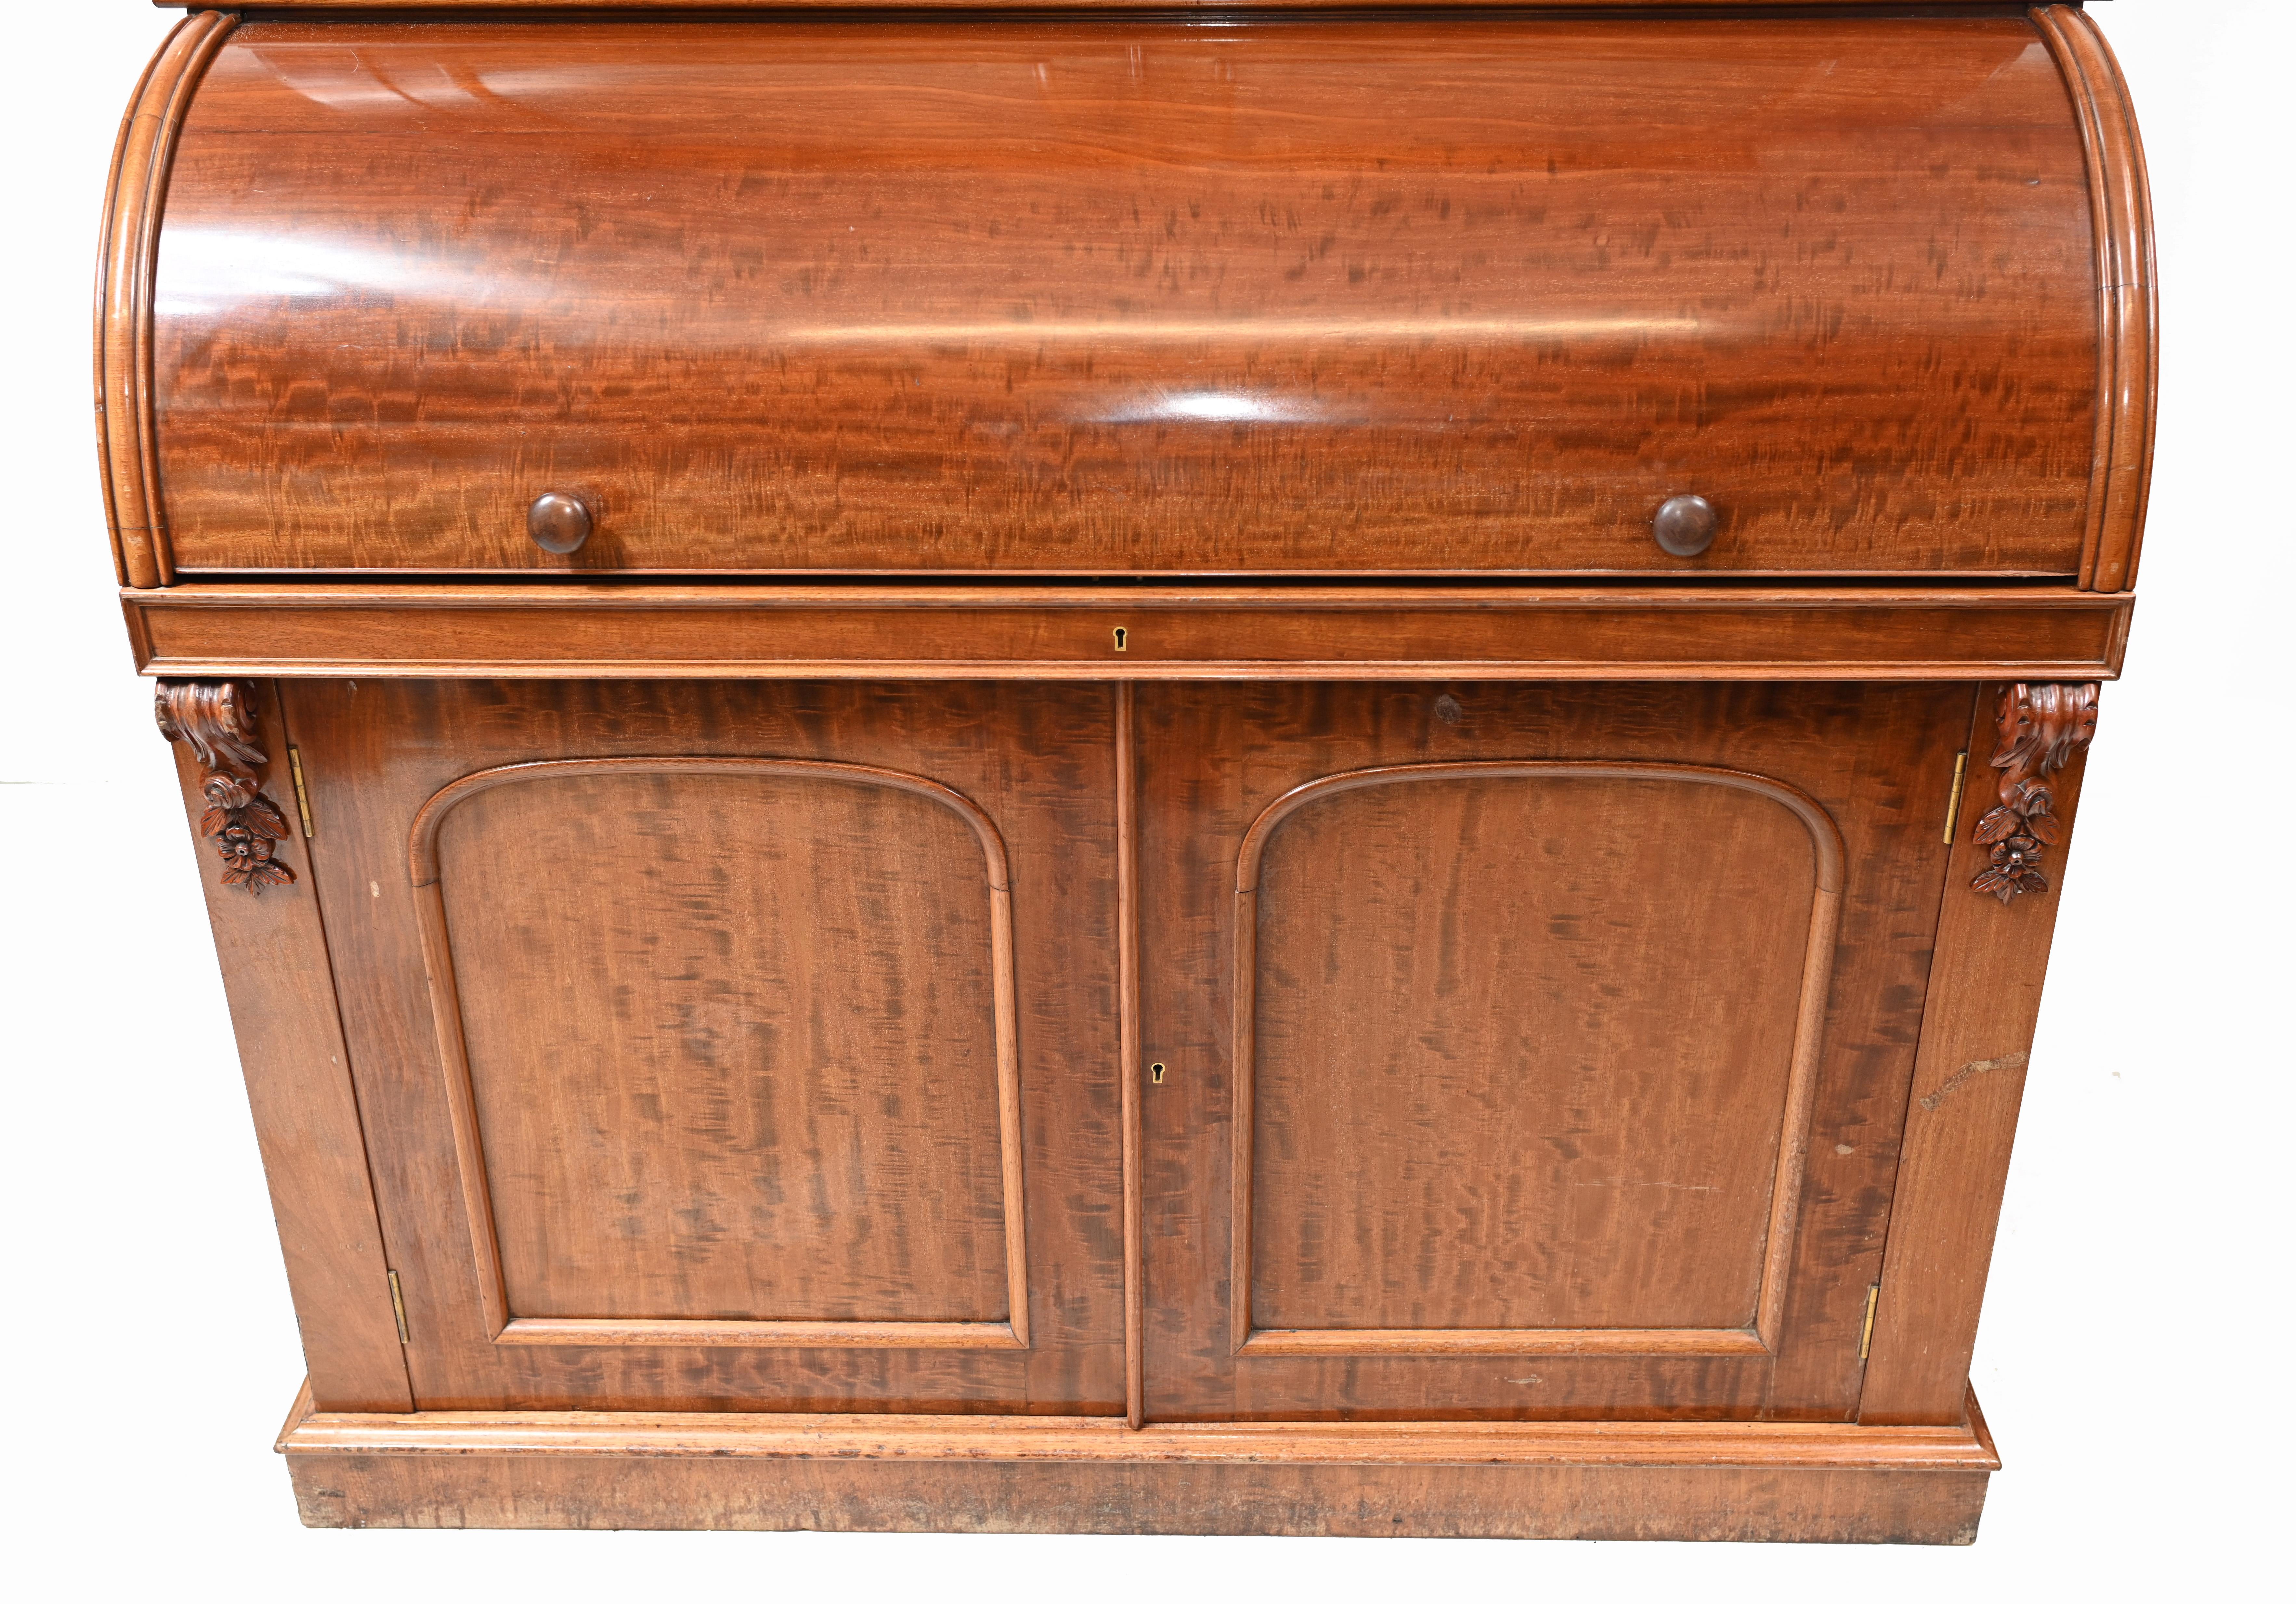 Stunning large mahogany secretaire bookcase we date to circa 1860
This piece is by Hobbs & Co of London who were reknowed for these type of pieces
The piece is inscribed Hobbs & Co on the locks please see close up photo
Roll top desk section